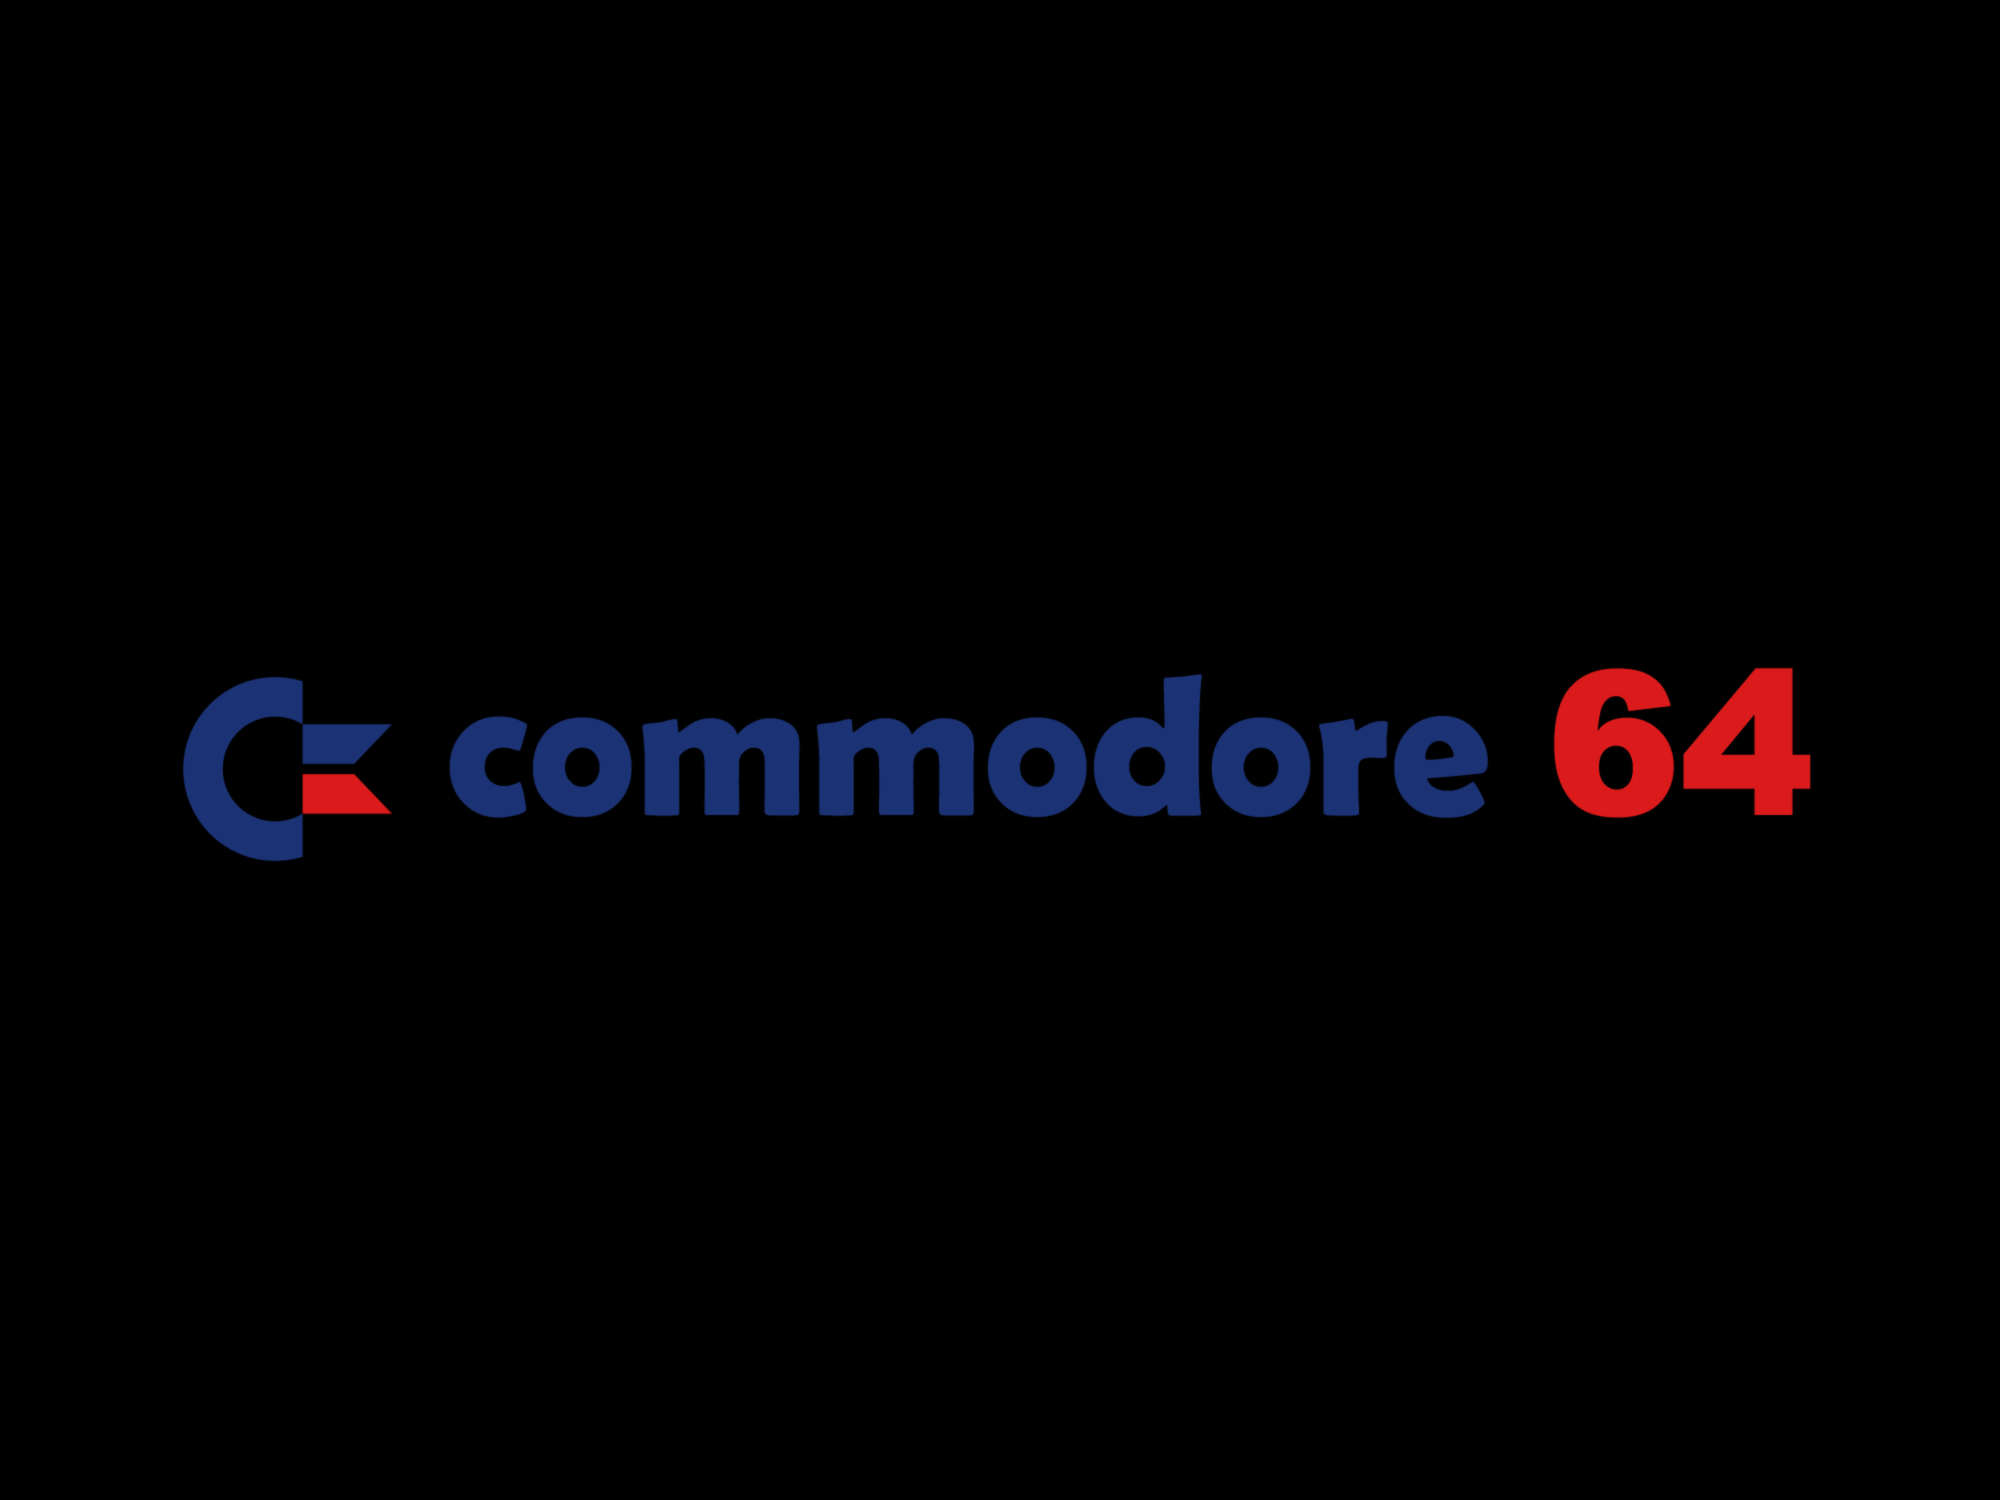 Commodore 64 Logo by icmerch on DeviantArt